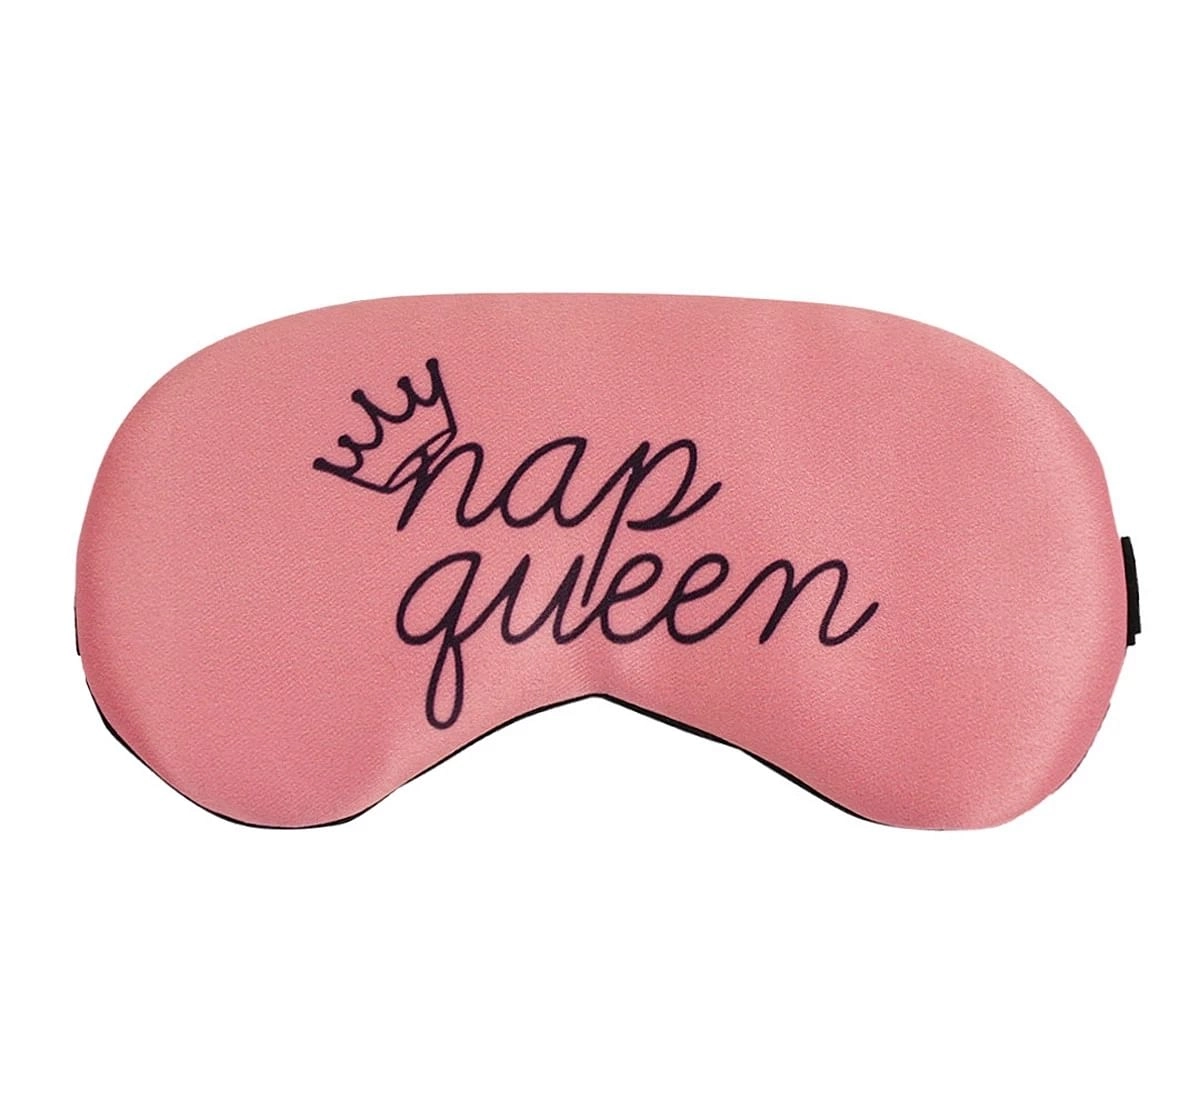 Luvley Nap Queen Printed Eye Mask/Sleep Mask For Relaxing, Medidation, Sleep, Travel For Girls & Kids, Pink, 3Y+